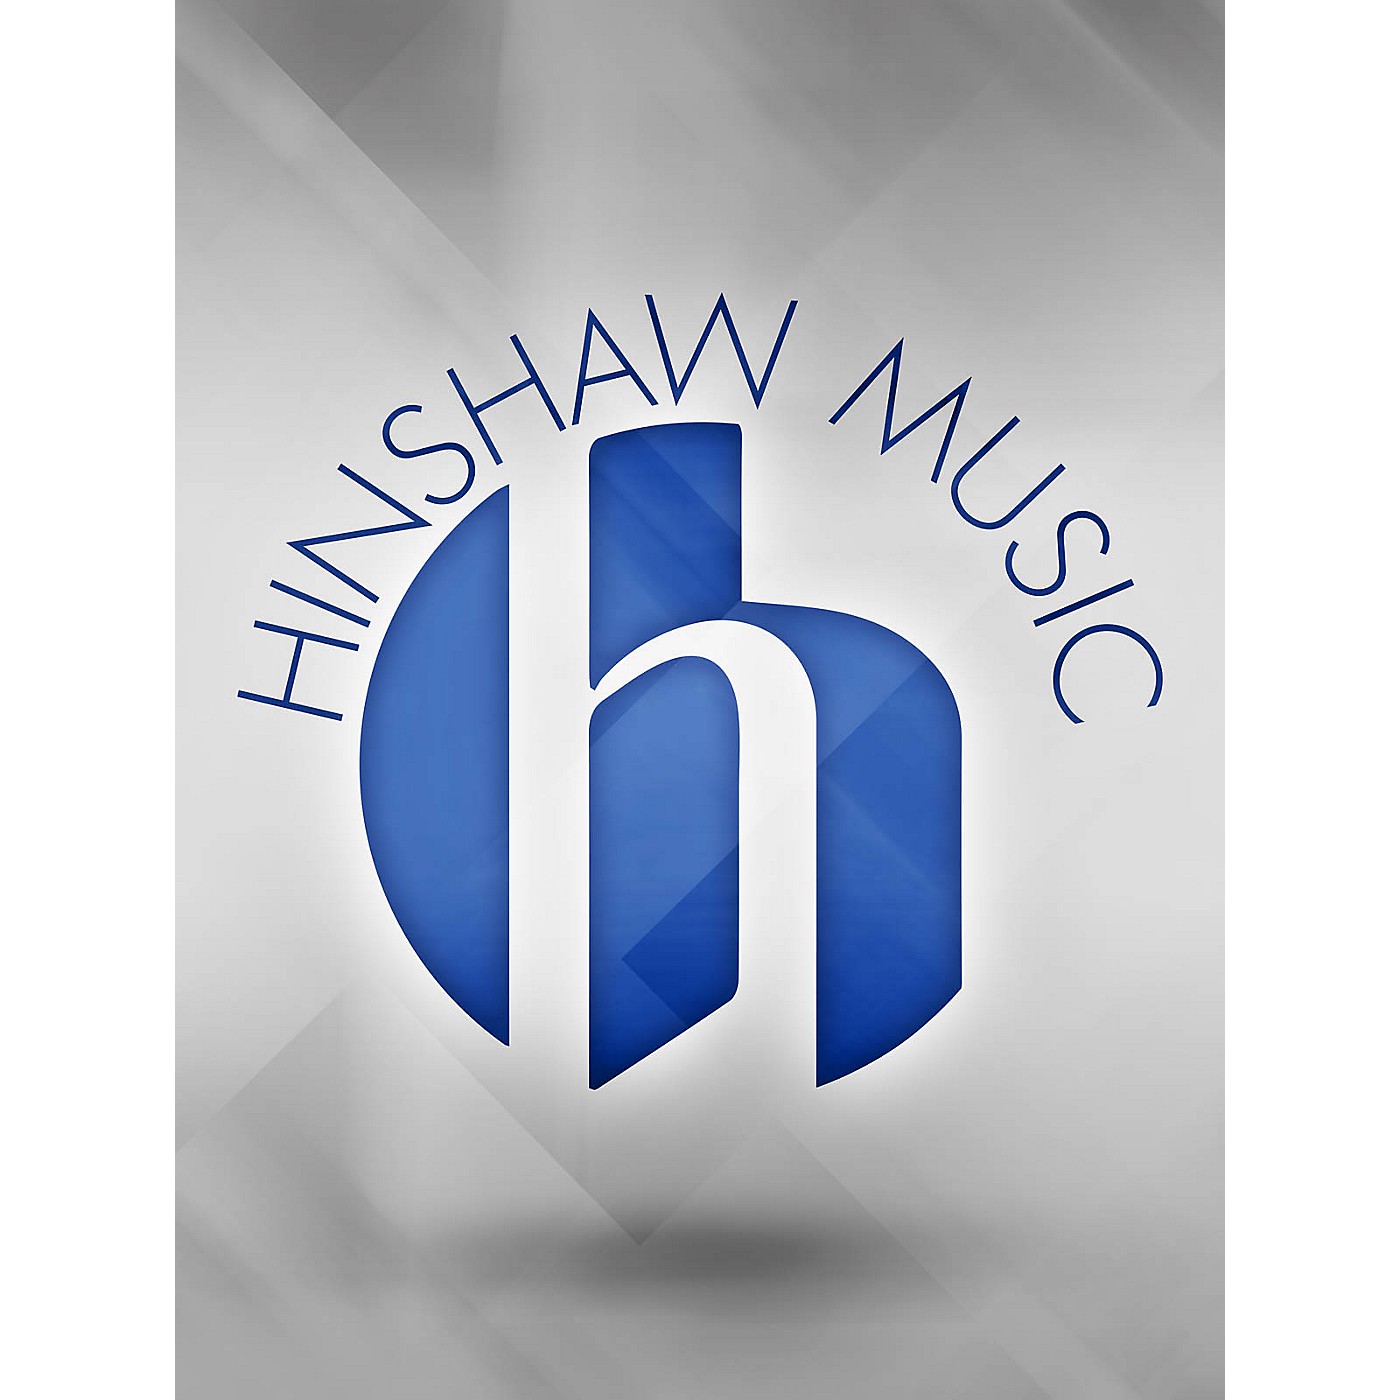 Hinshaw Music Only in the Lord 2-Part Composed by Hank Beebe thumbnail